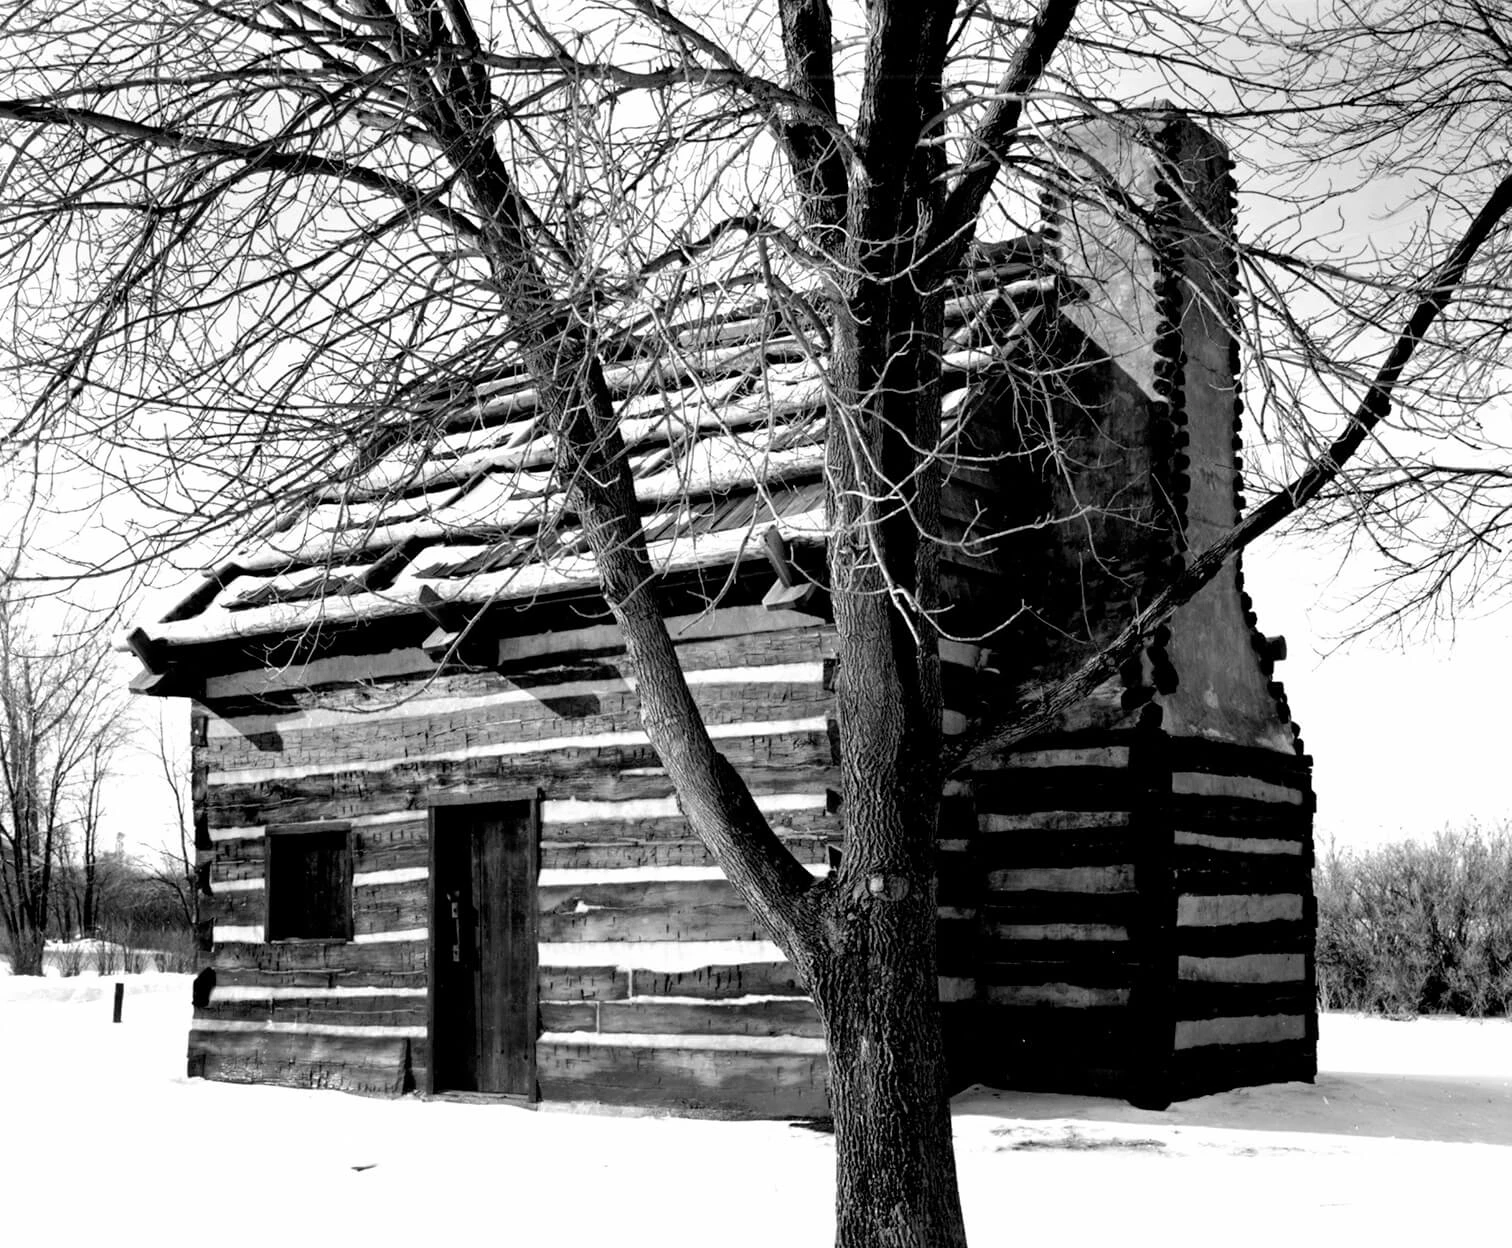 Black and white photo of a rectangular log cabin with a door and window on the longer side and chimney on the shorter side. There is a large tree in the foreground next to the cabin and snow on the ground.